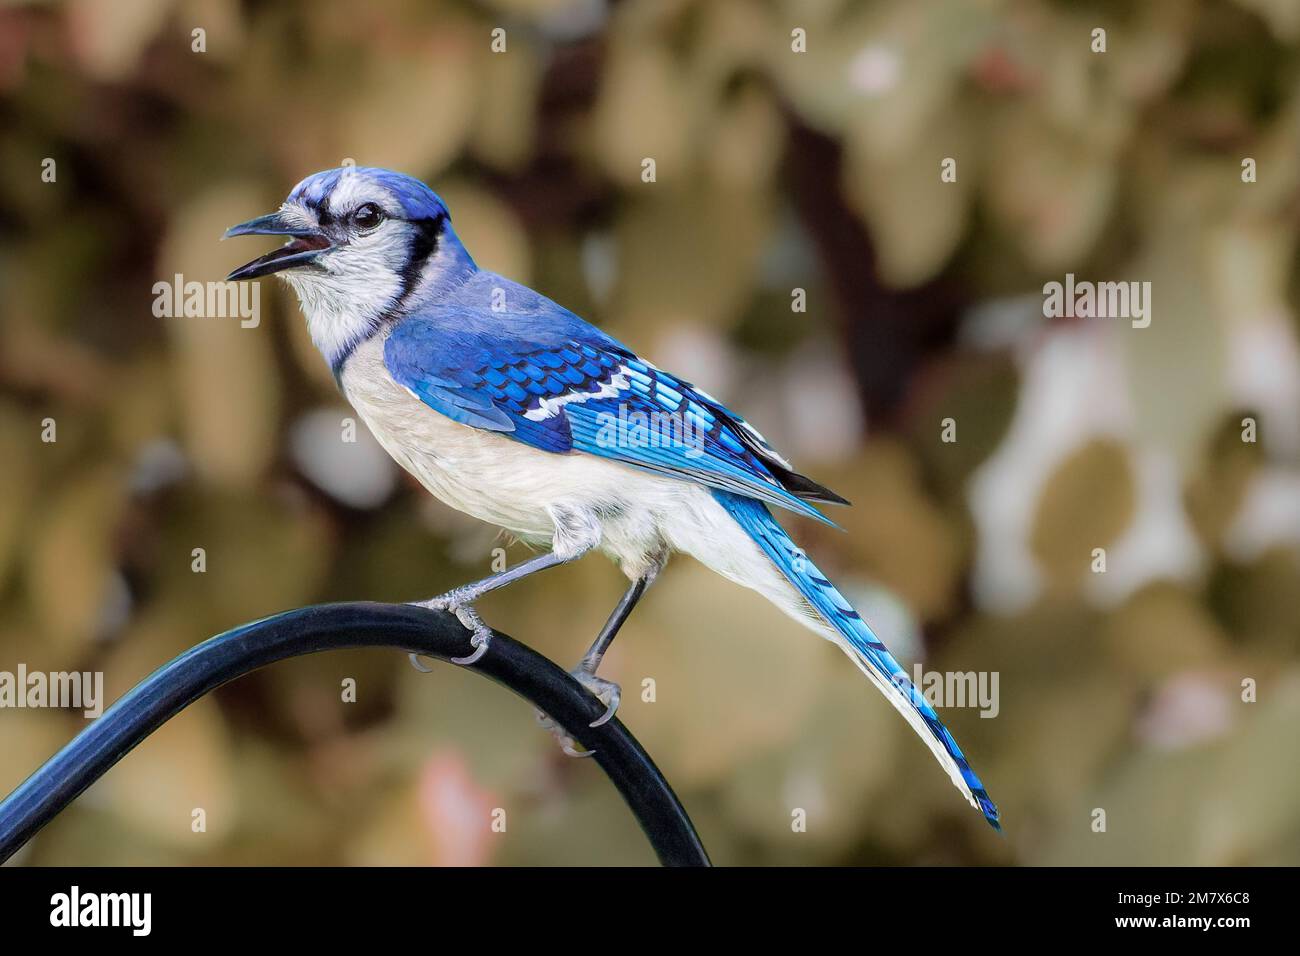 A close-up shot of a blue jay perched on a fence Stock Photo